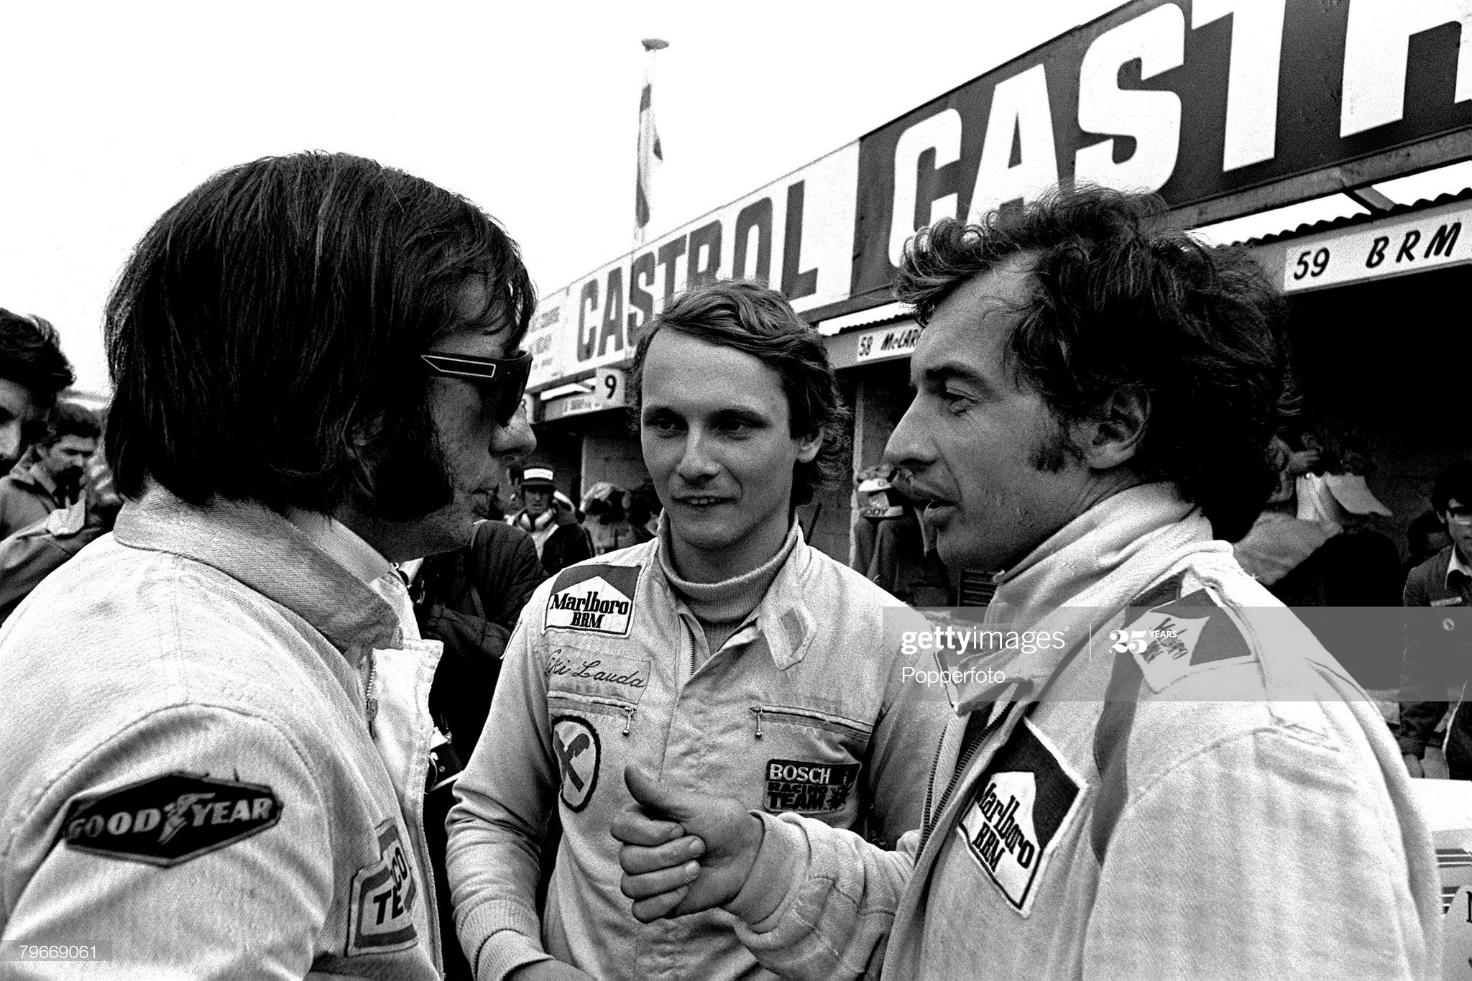 Jean Pierre Beltoise with Emerson Fittipaldi and Niky Lauda.